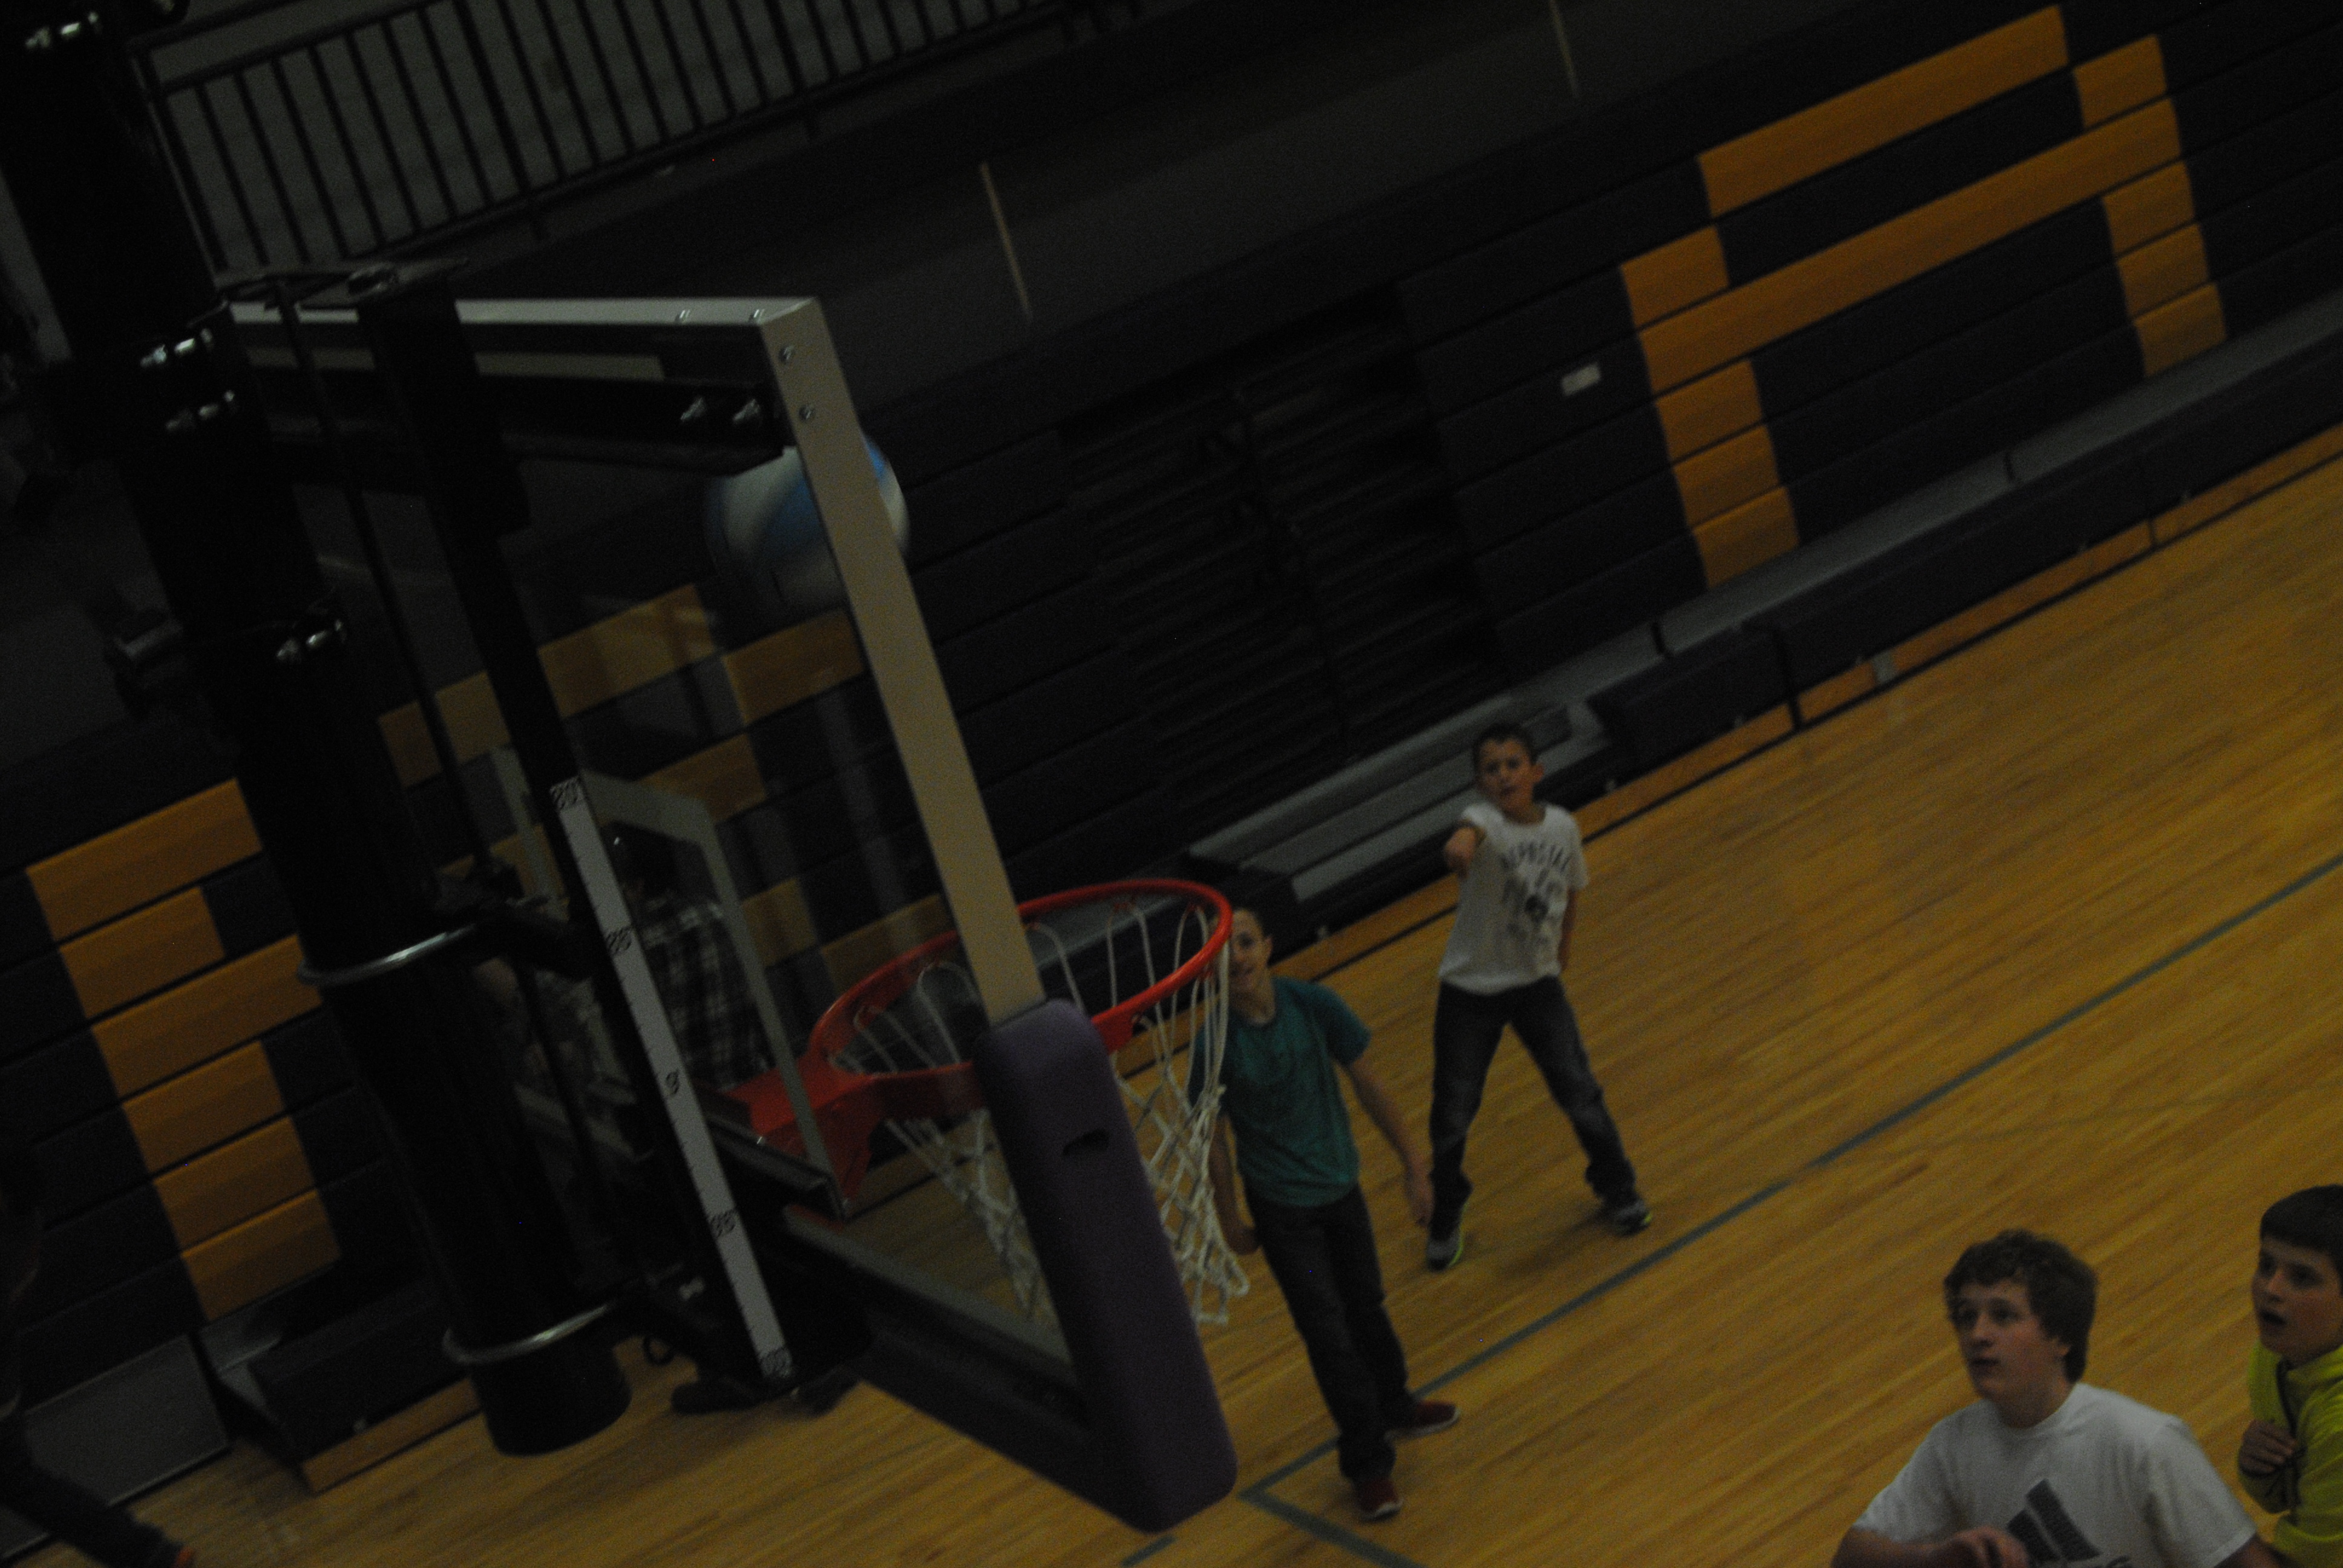 Seventh grader Wyatt Ashley shoots the ball in a game of basketball. This was during the Junior High recess that goes on after their lunch.